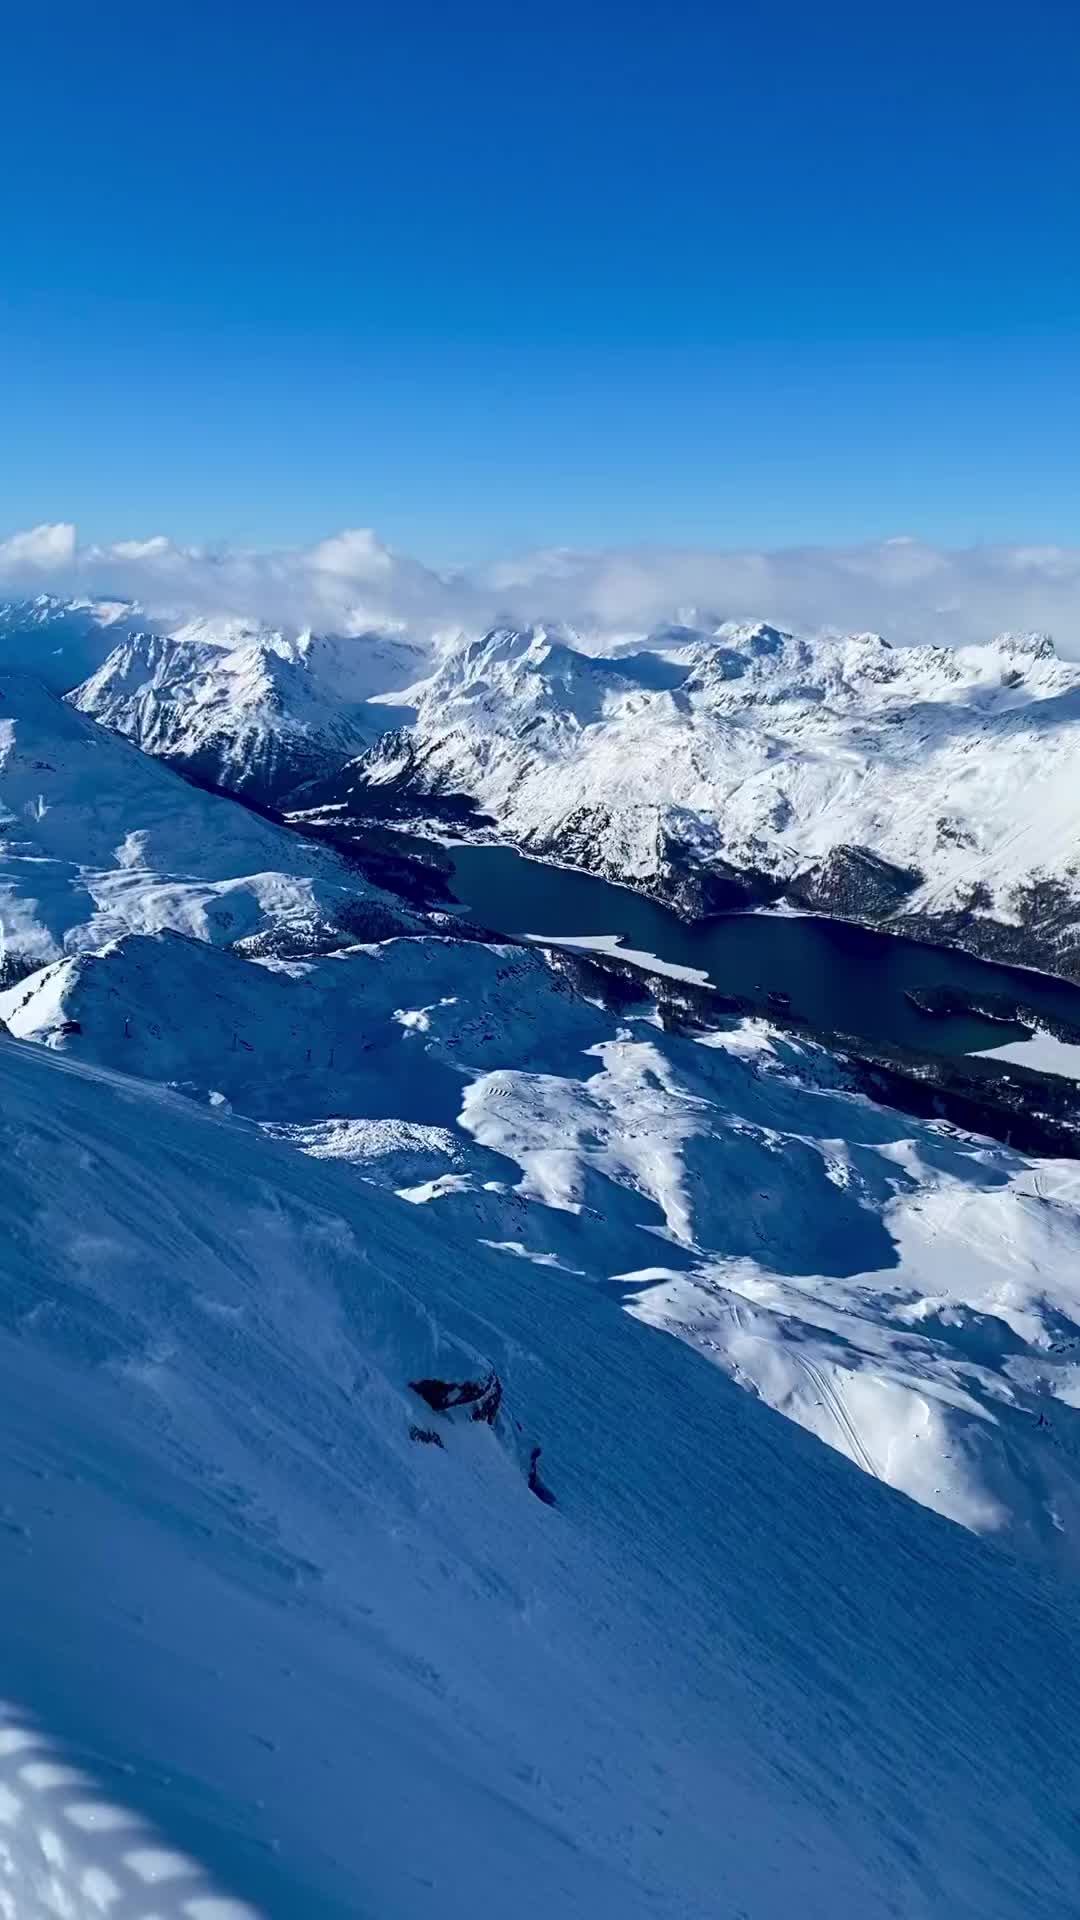 Explore Corvatsch: The Highest Peak in Engadin by Cable Car